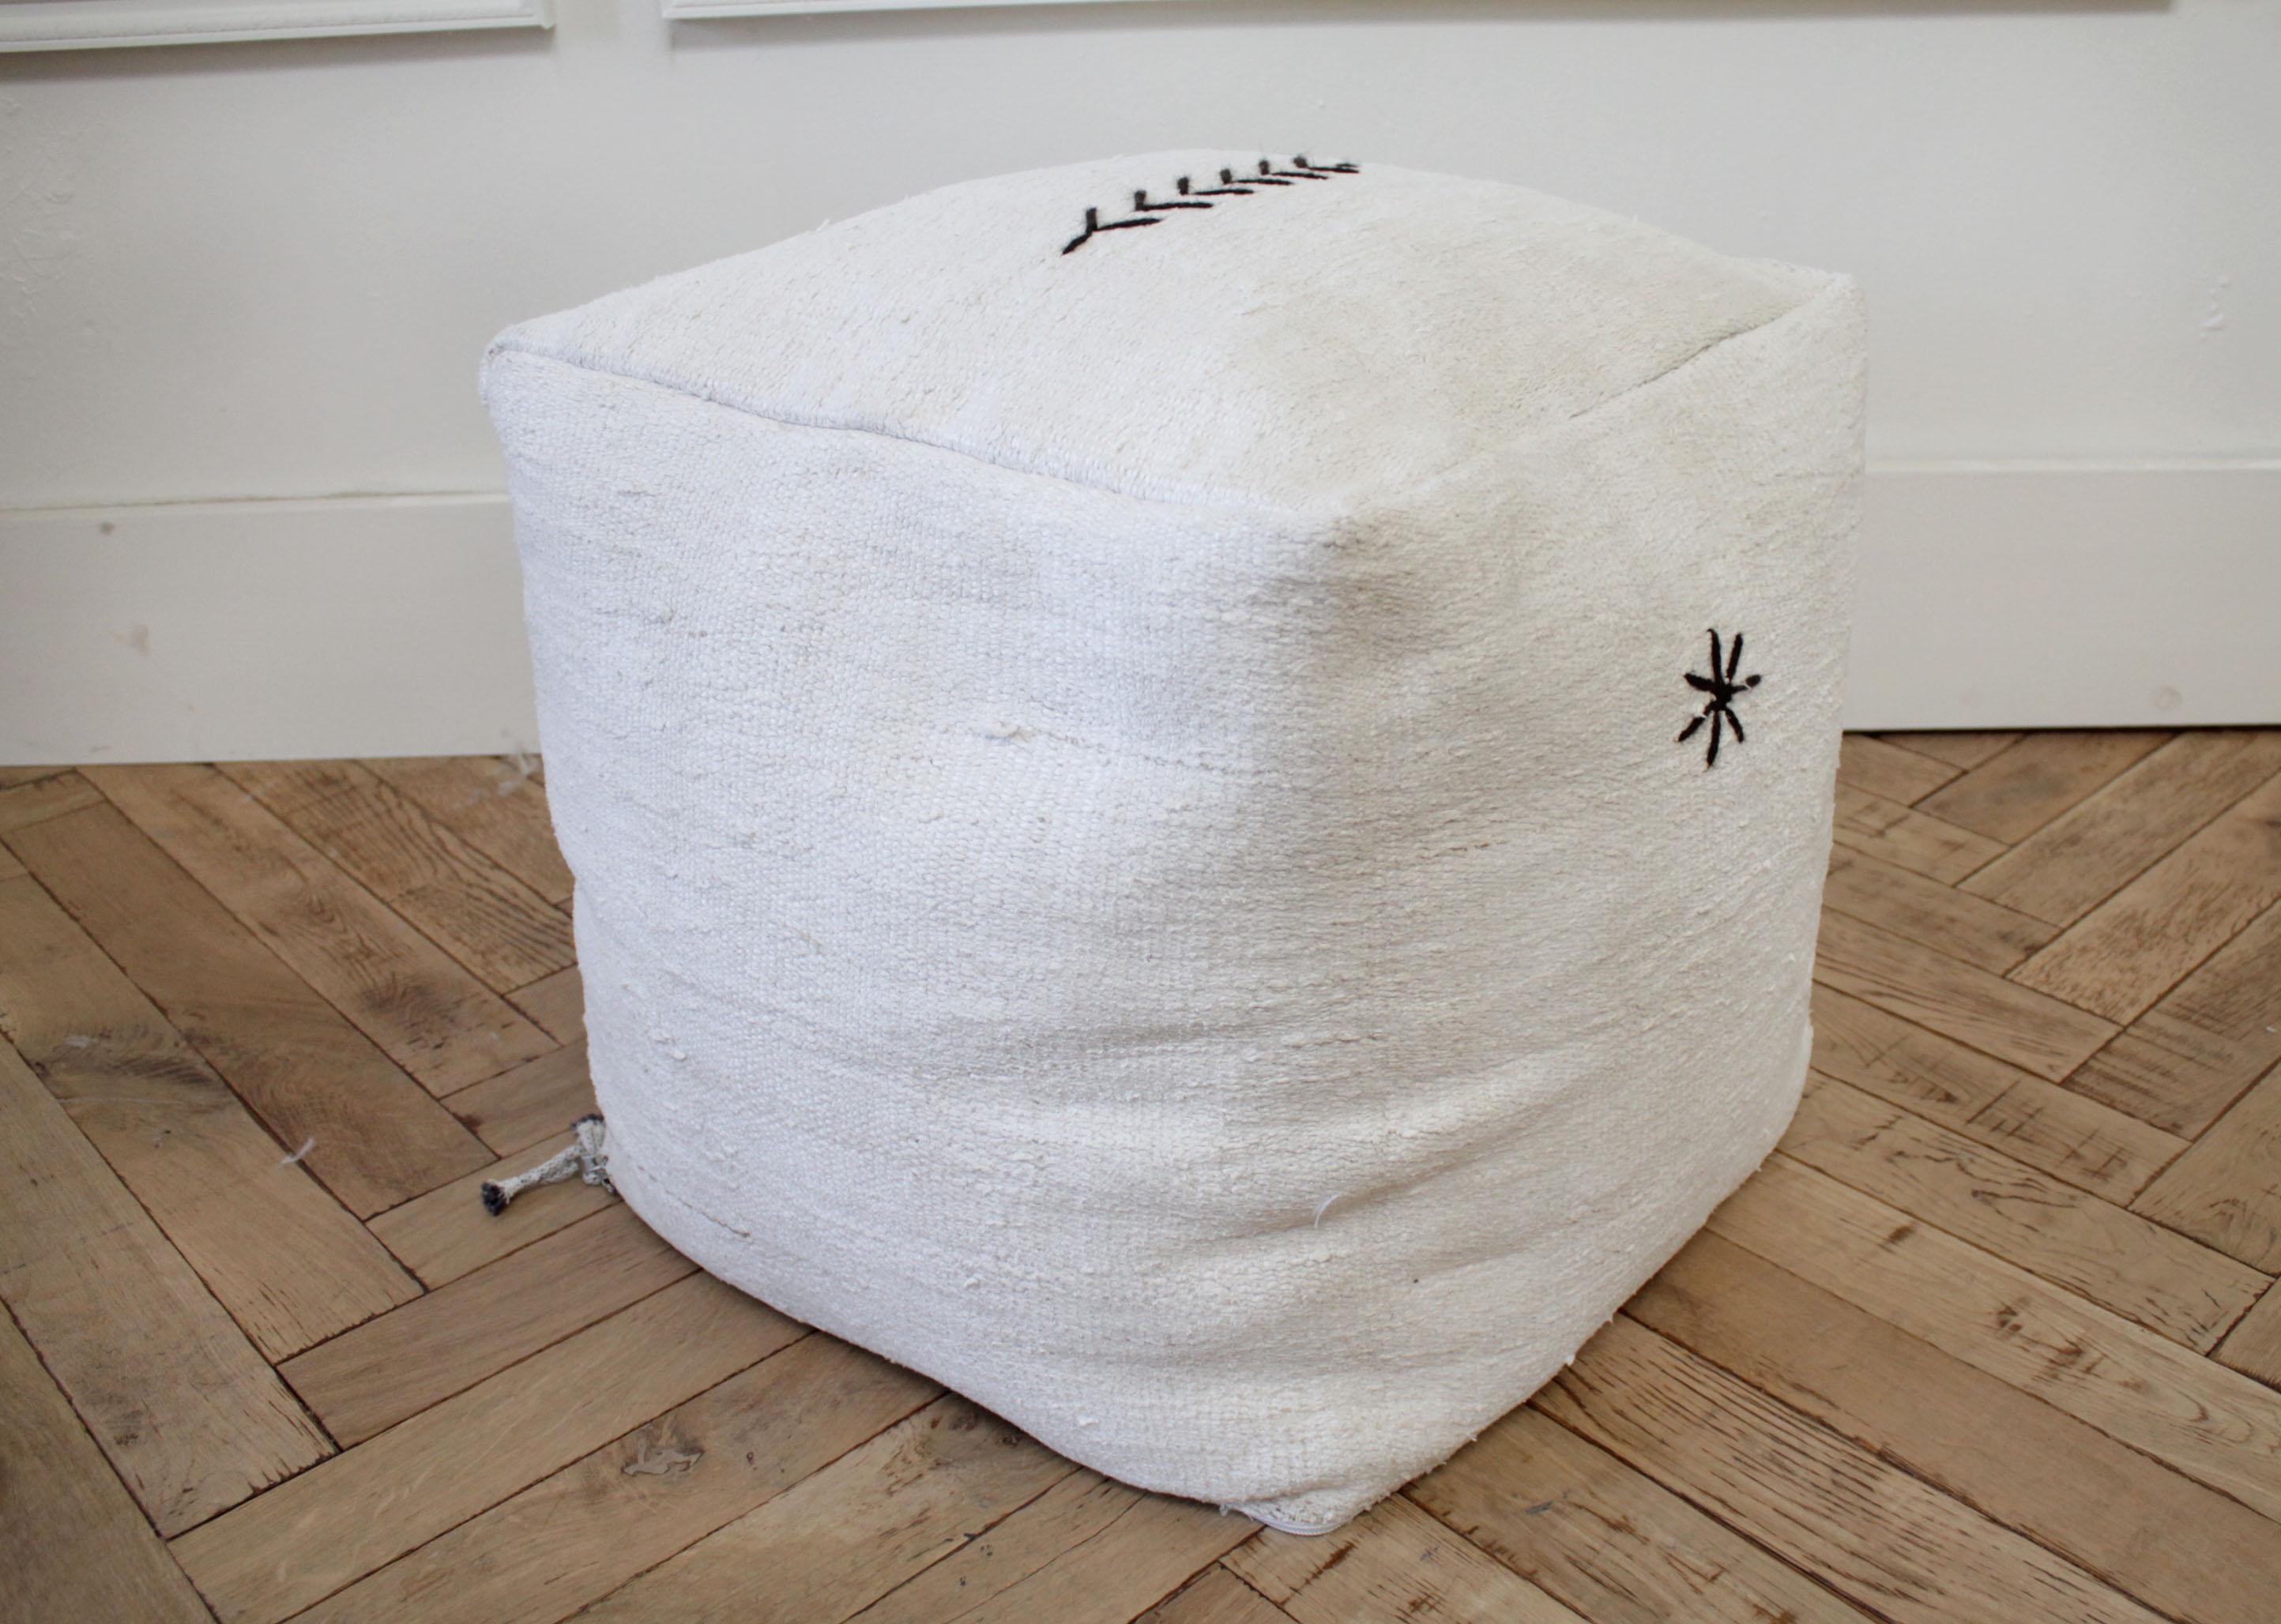 Custom made vintage woven rug cube Pouf Ottoman
A soft white rug with original stitched zig zag and star. Zipper closure on the bottom, can be washed. This is a nice nubby thick rug, with stuffed foam beans, it does not fall flat when you sit on